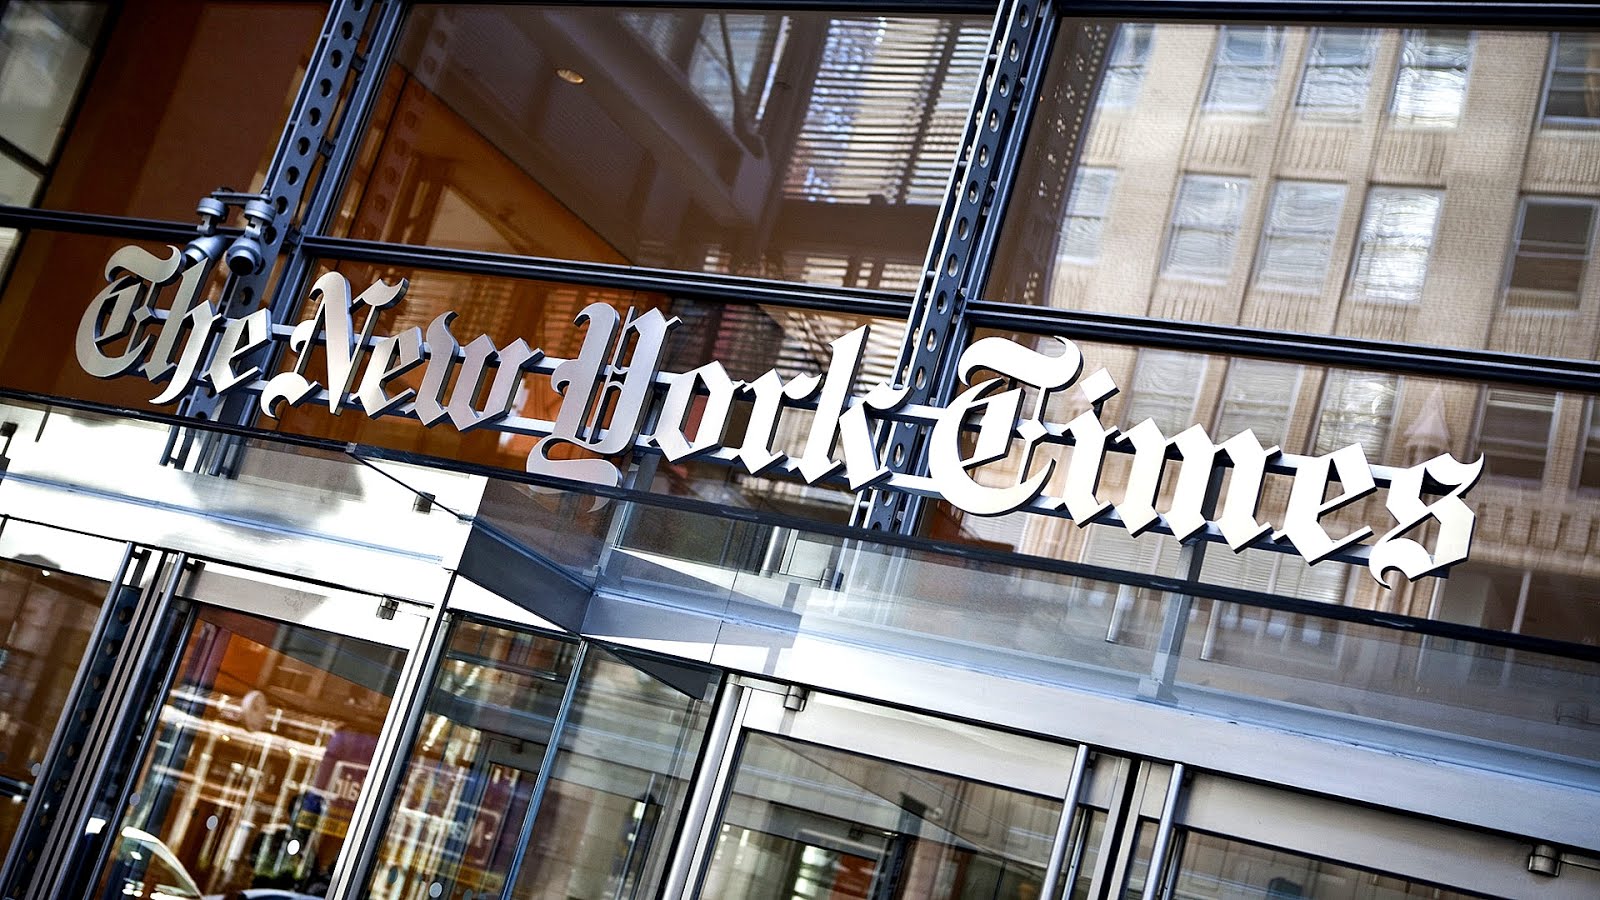 How Much Does The Sunday New York Times Cost